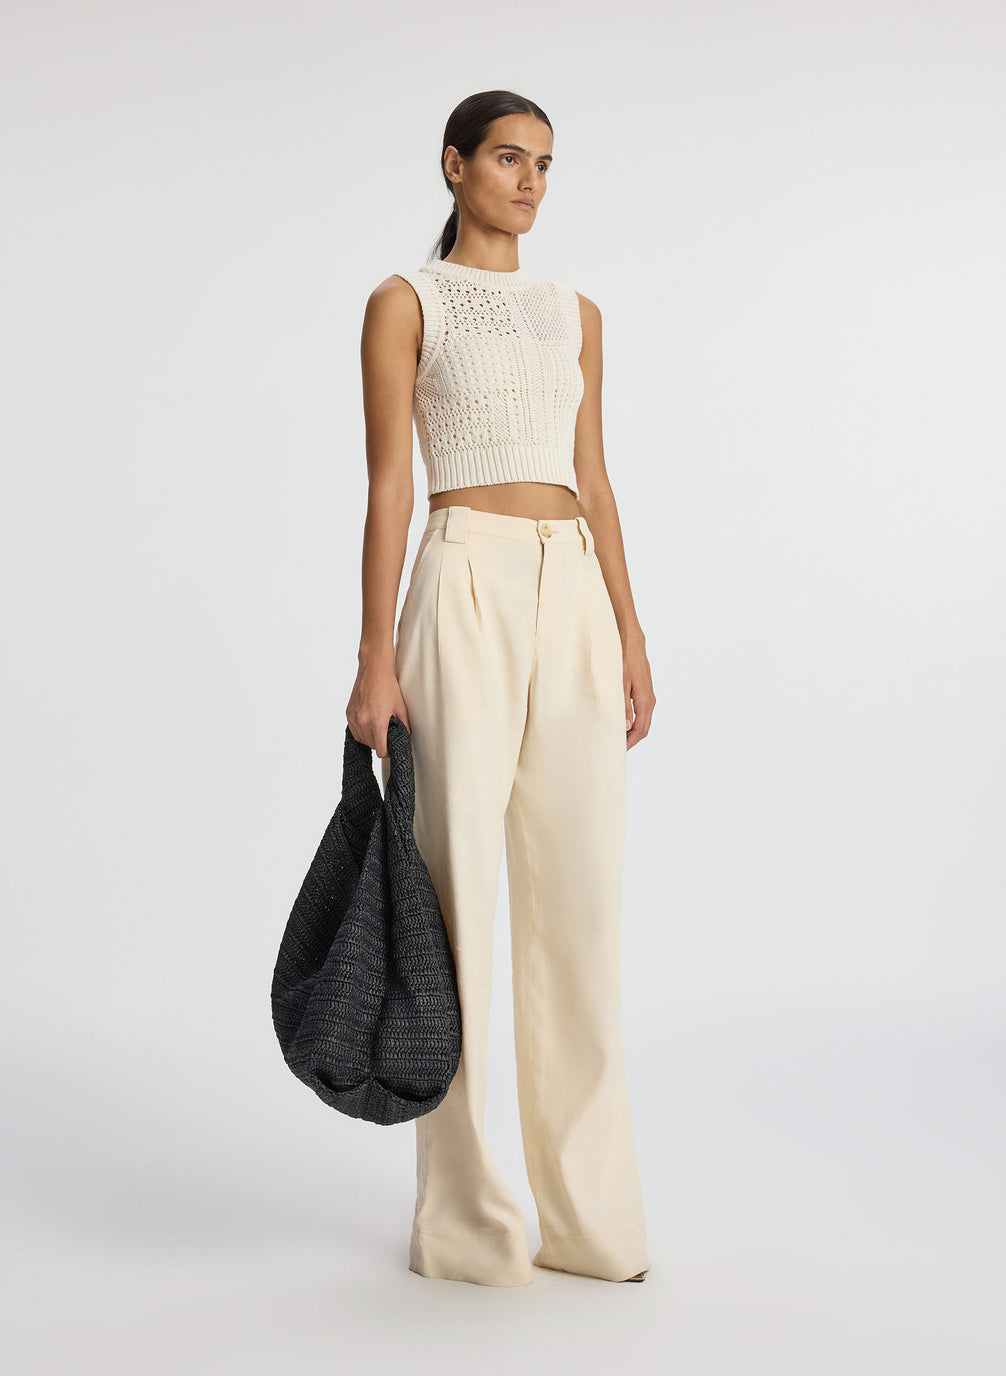 side view of woman wearing cream sleeveless cropped crochet top and beige pants